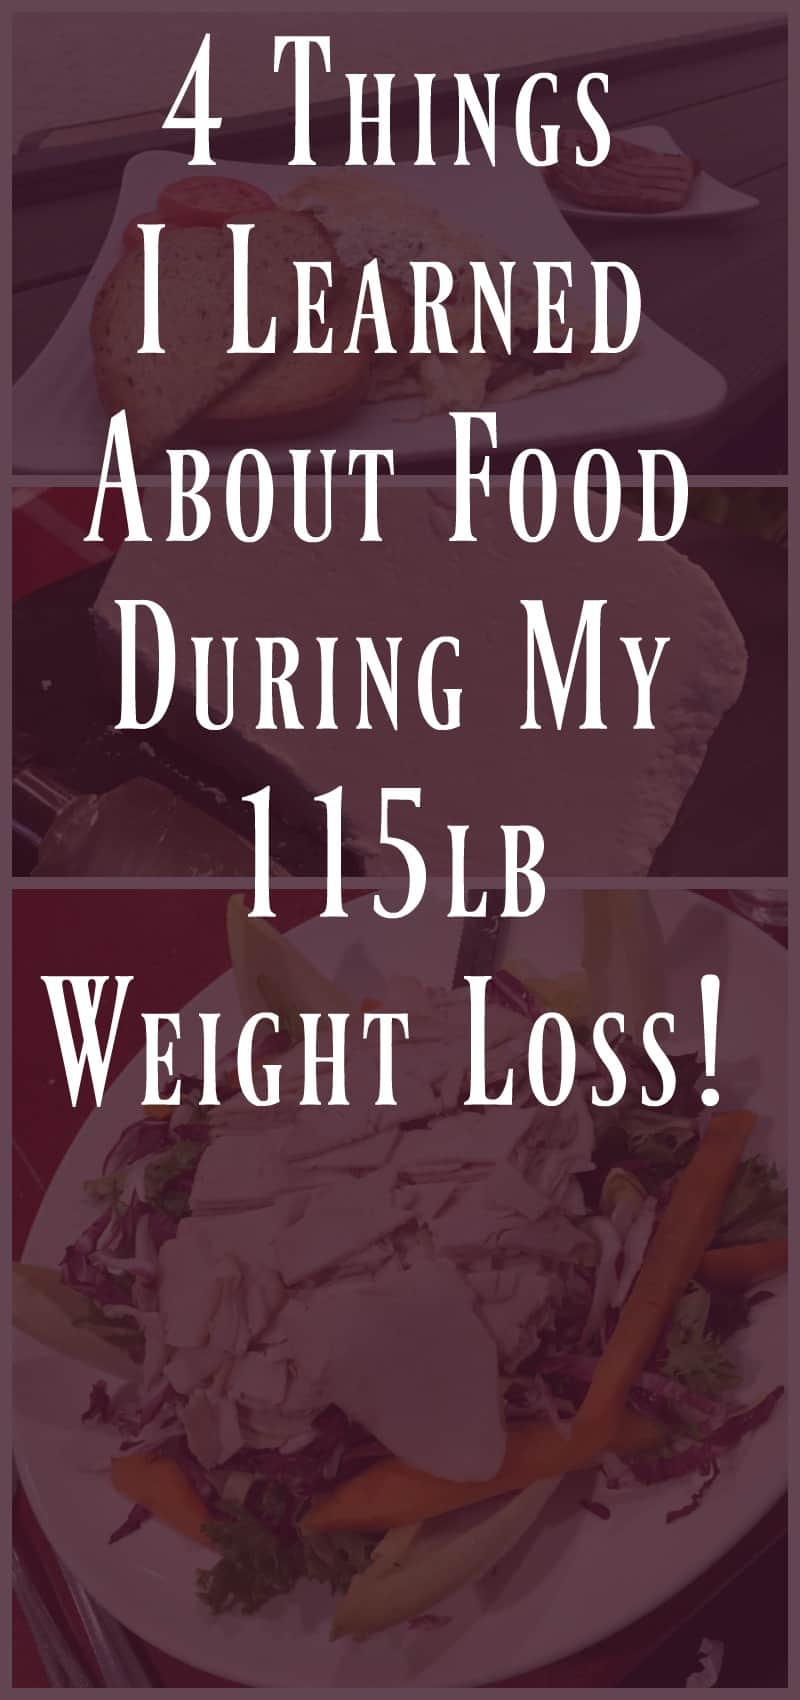 4 Things I Learned About Food During My 115 lb Weight Loss